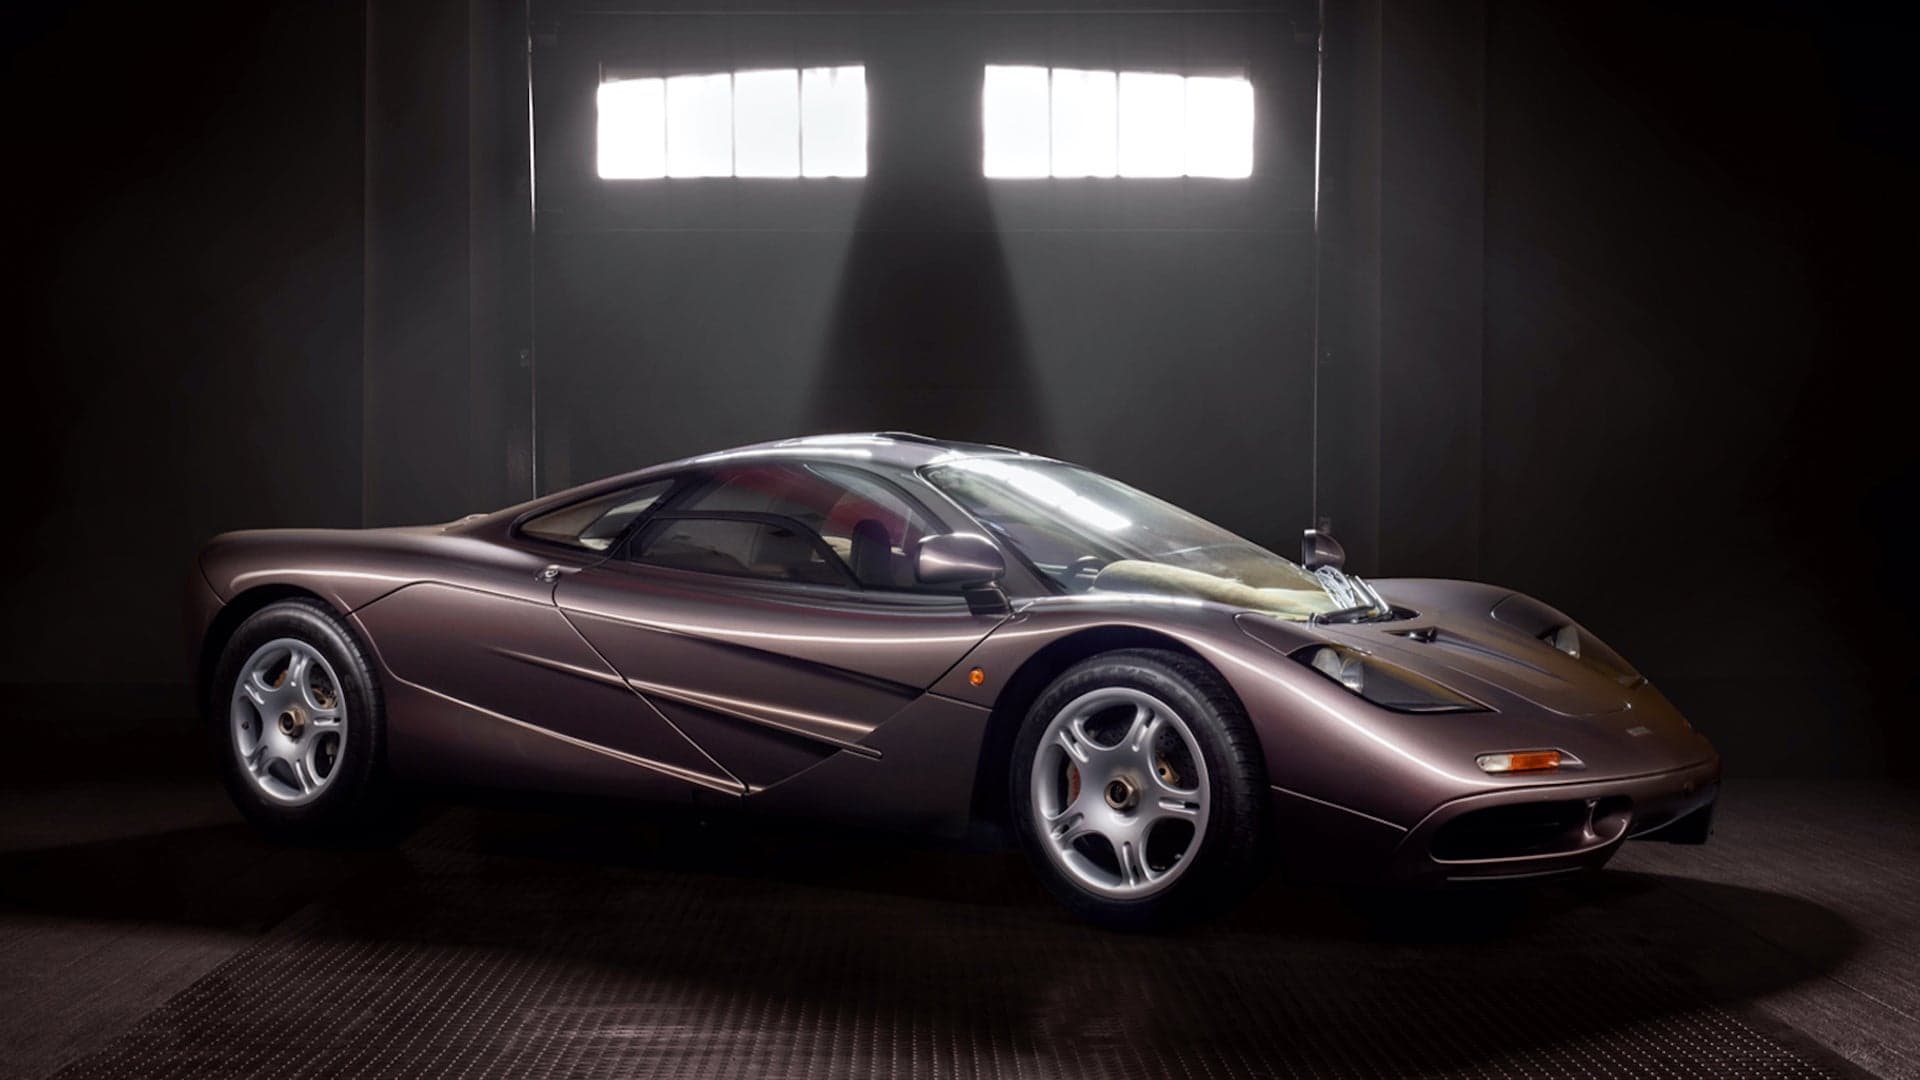 A $20M McLaren F1 and Other Collector Car Absurdity From Pebble Beach